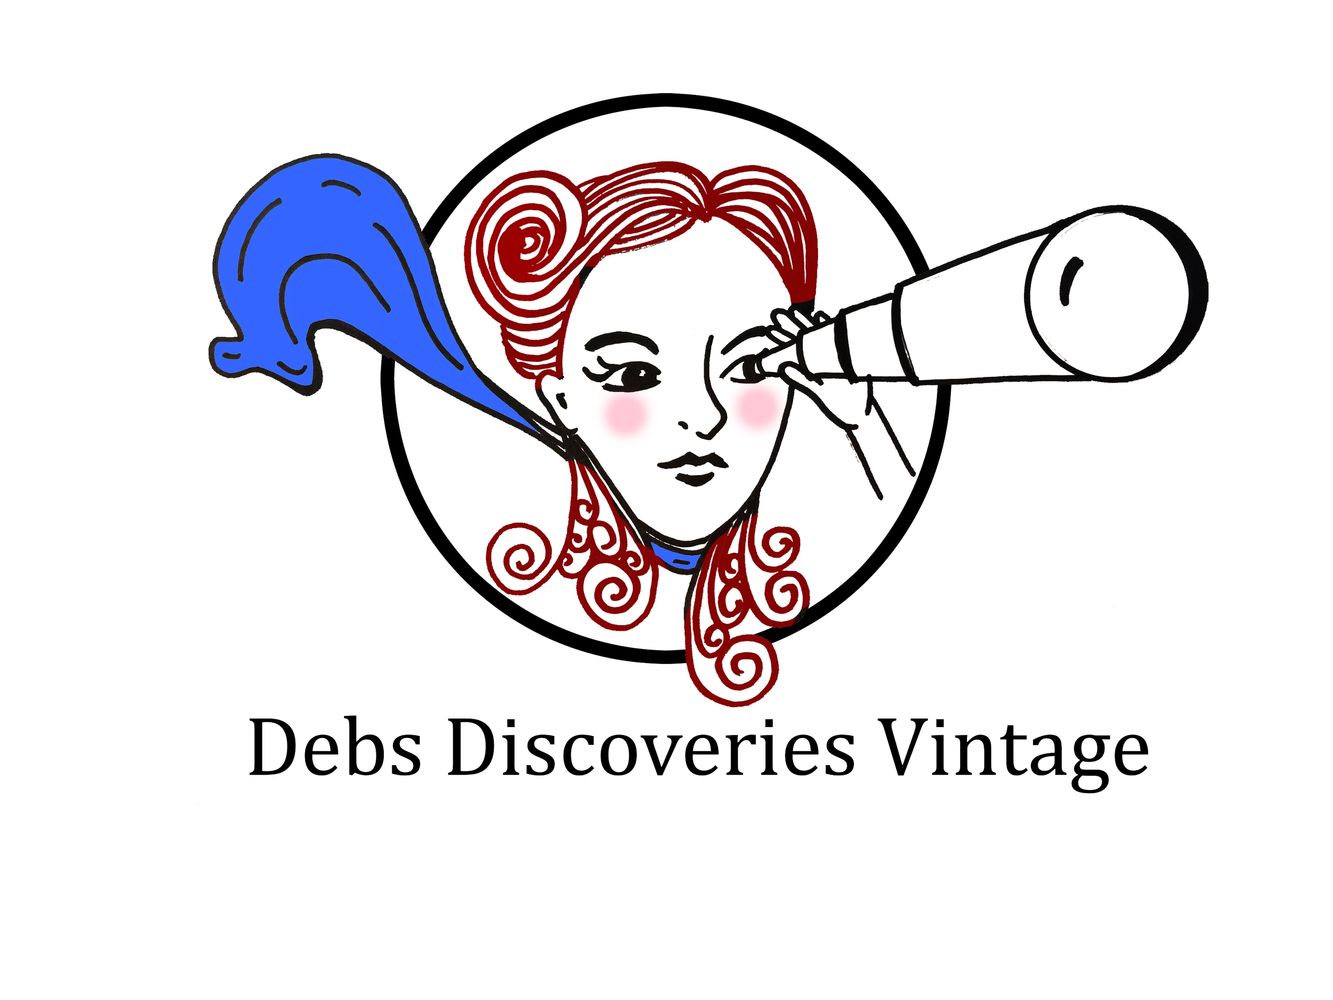 Deb of Debs Discoveries Vintage Jewelry - always on the lookout for vintage and modern jewelry, coll